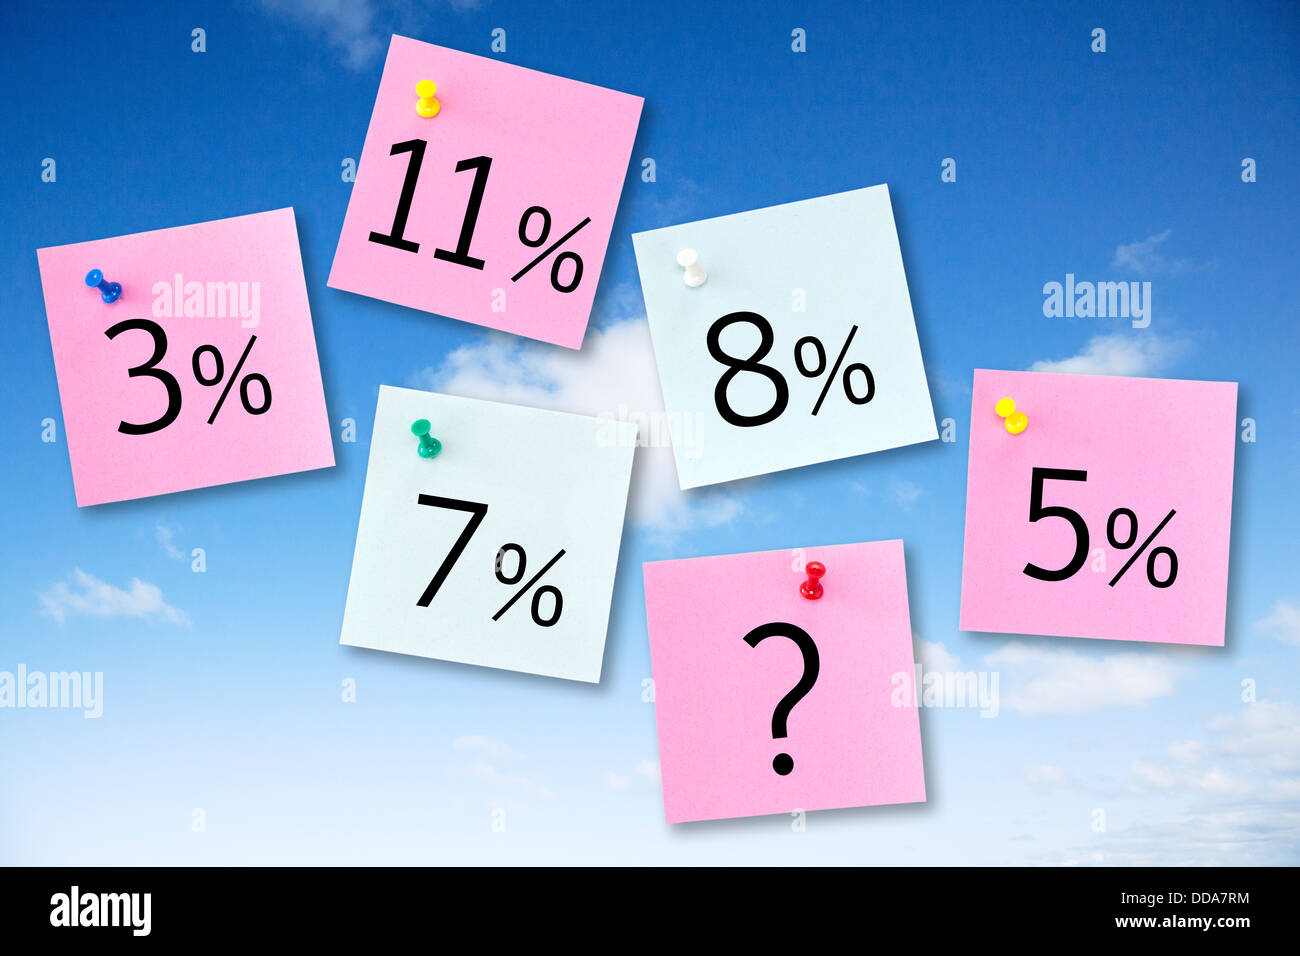 Interest Rates Concept - Notes on sky showing various interest or mortgage rates, and one with a question mark... Stock Photo